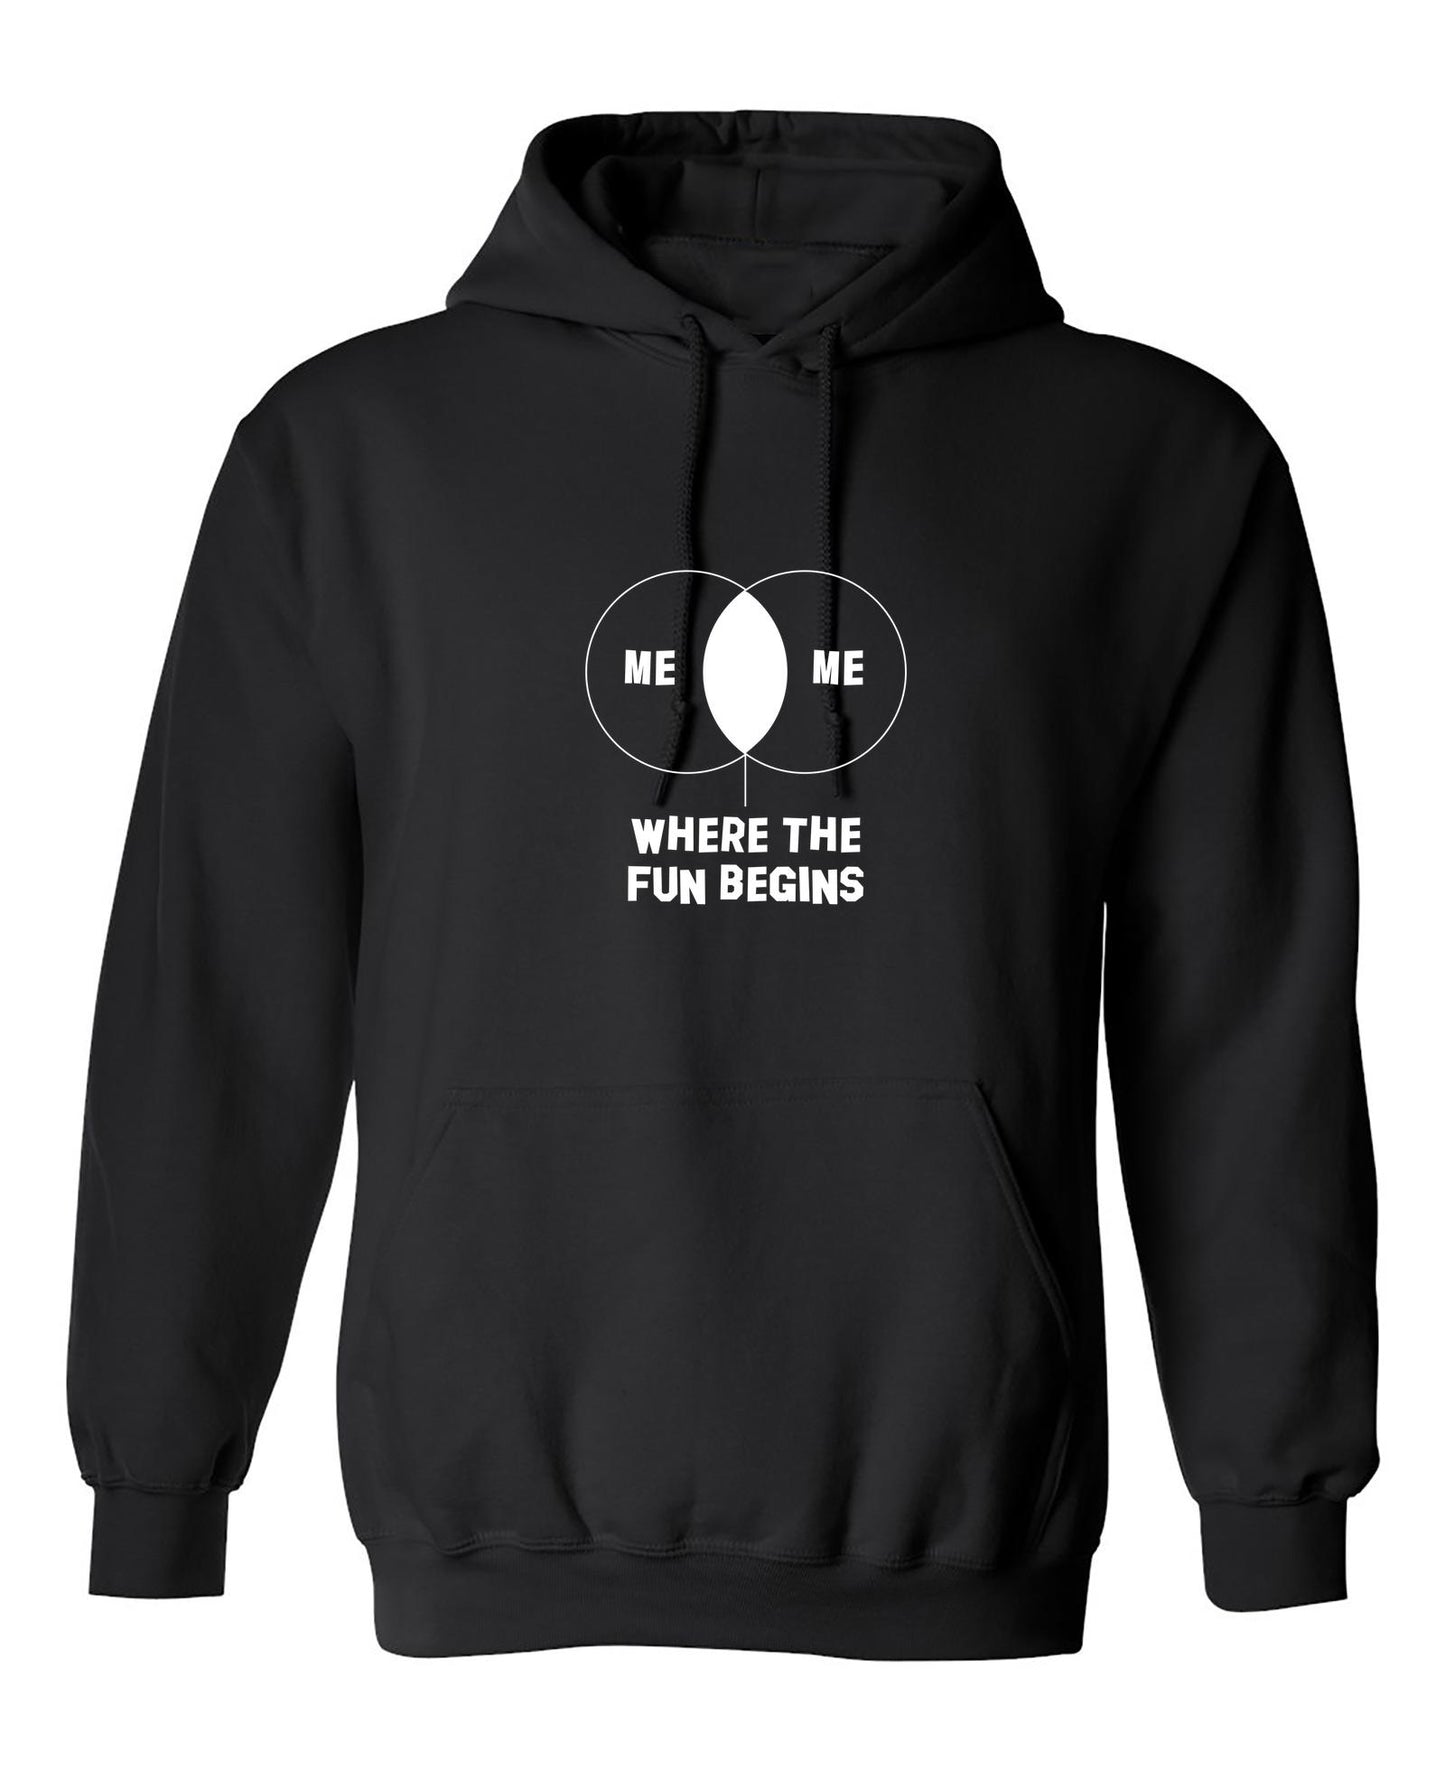 Funny T-Shirts design "Me Me where the fun begins"